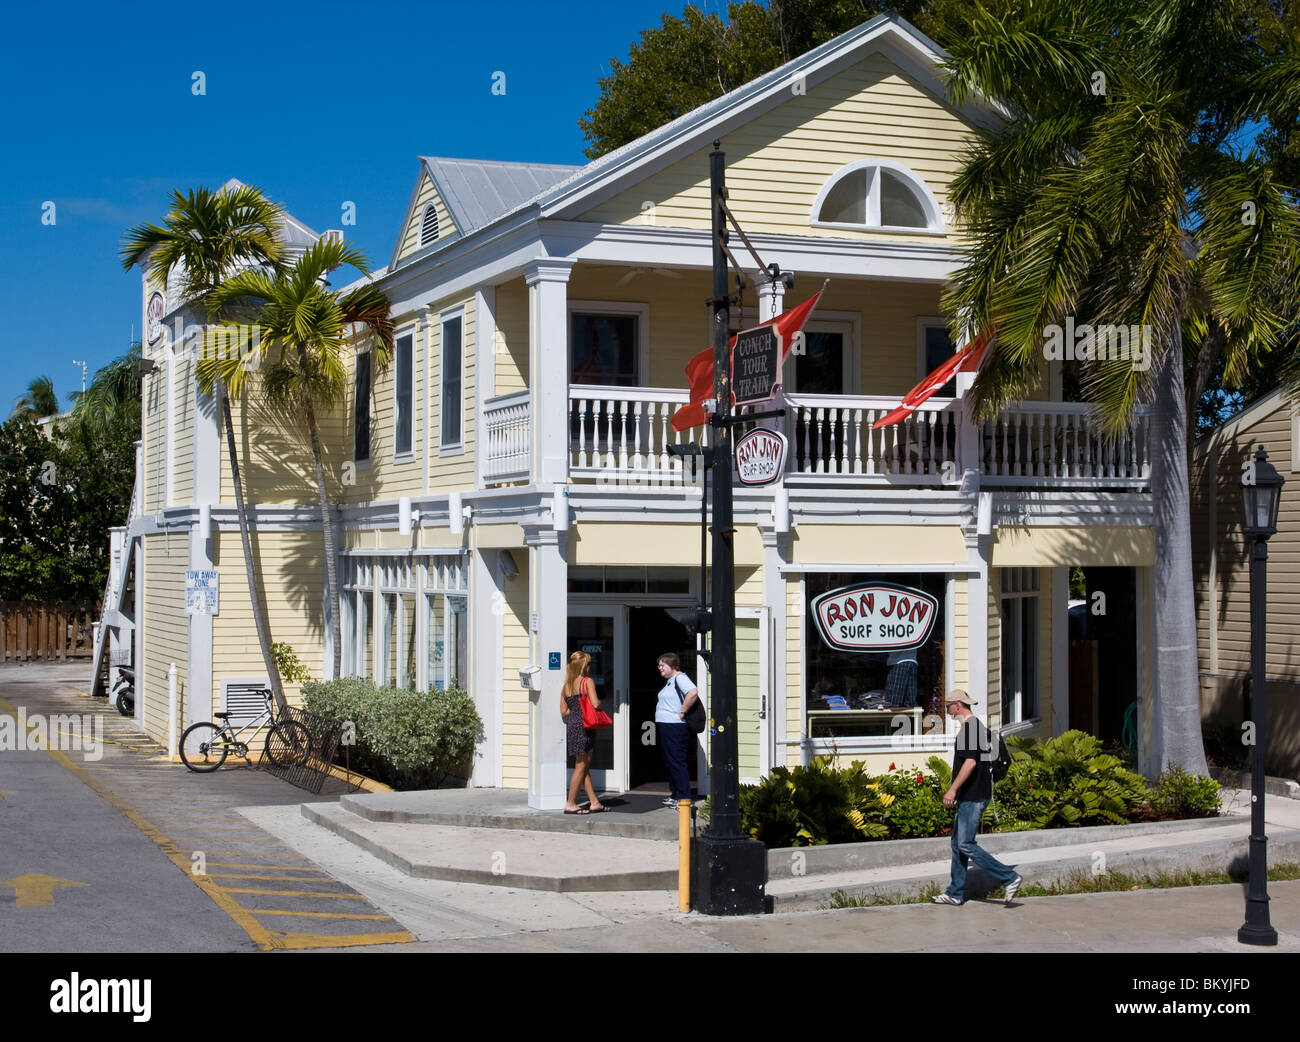 The typical wood frame and clad architecture of the Ron Jon Surf Shop at Key West, Florida, USA. Stock Photo